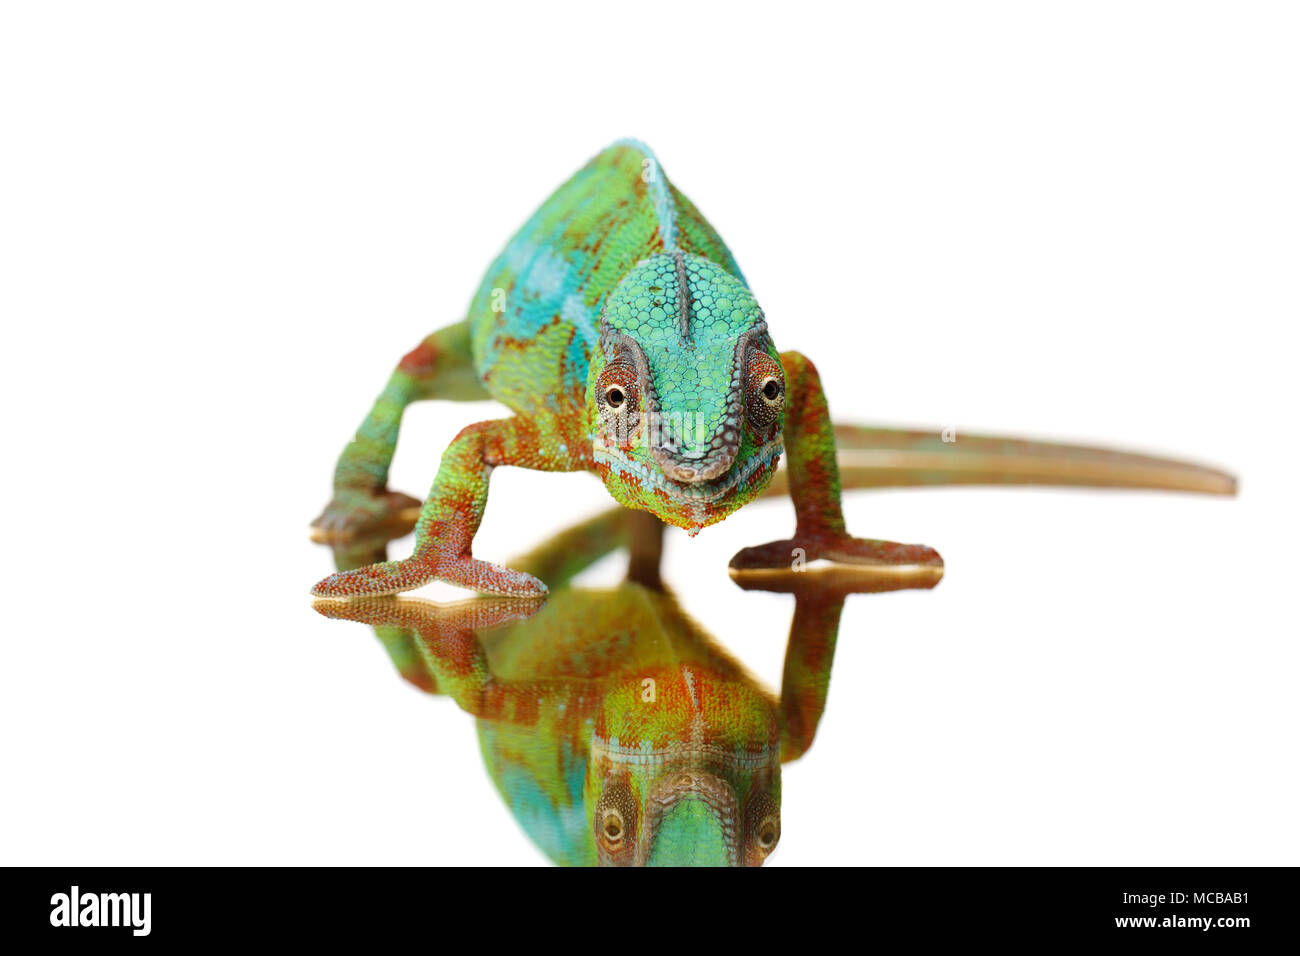 alive chameleon reptile sitting on mirror surface. studio shot isolated on white background. copy space. Stock Photo